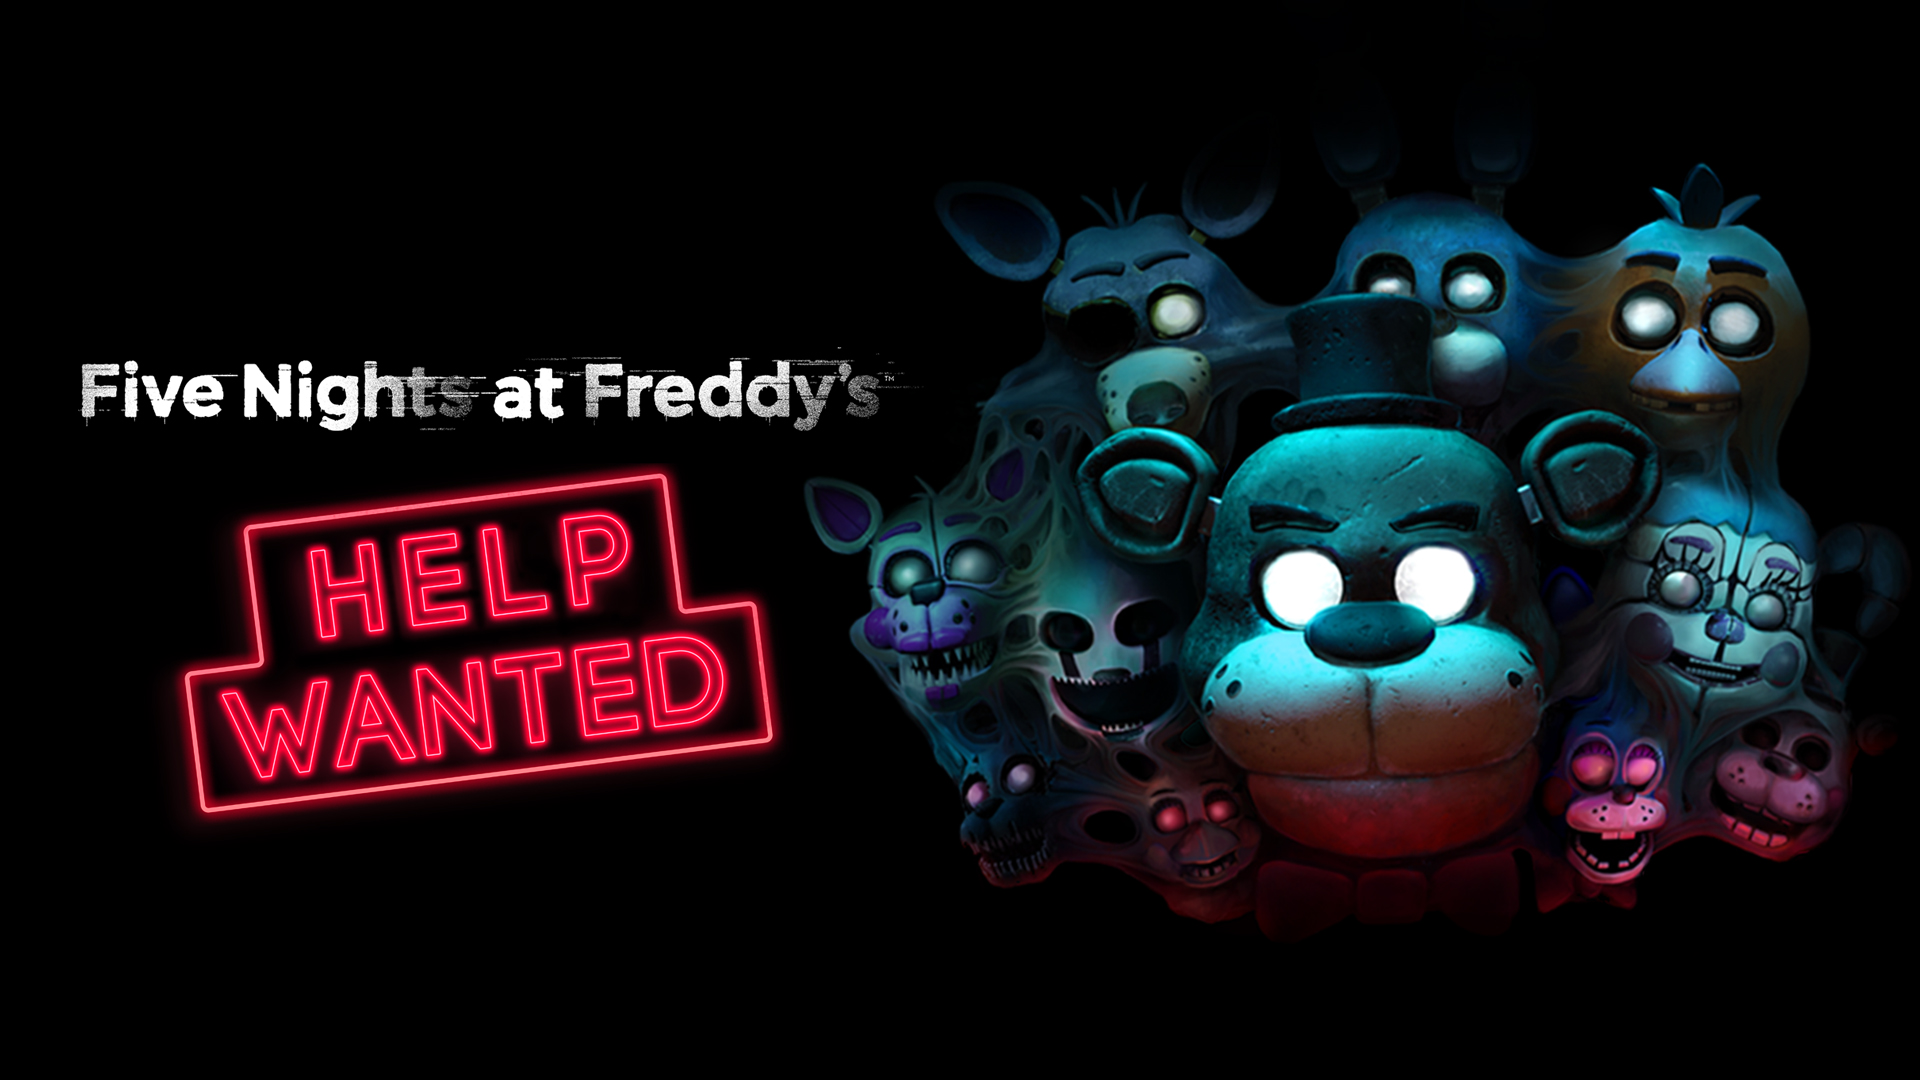 Are you the pro in Five Nights at Freddy's / FNaF?